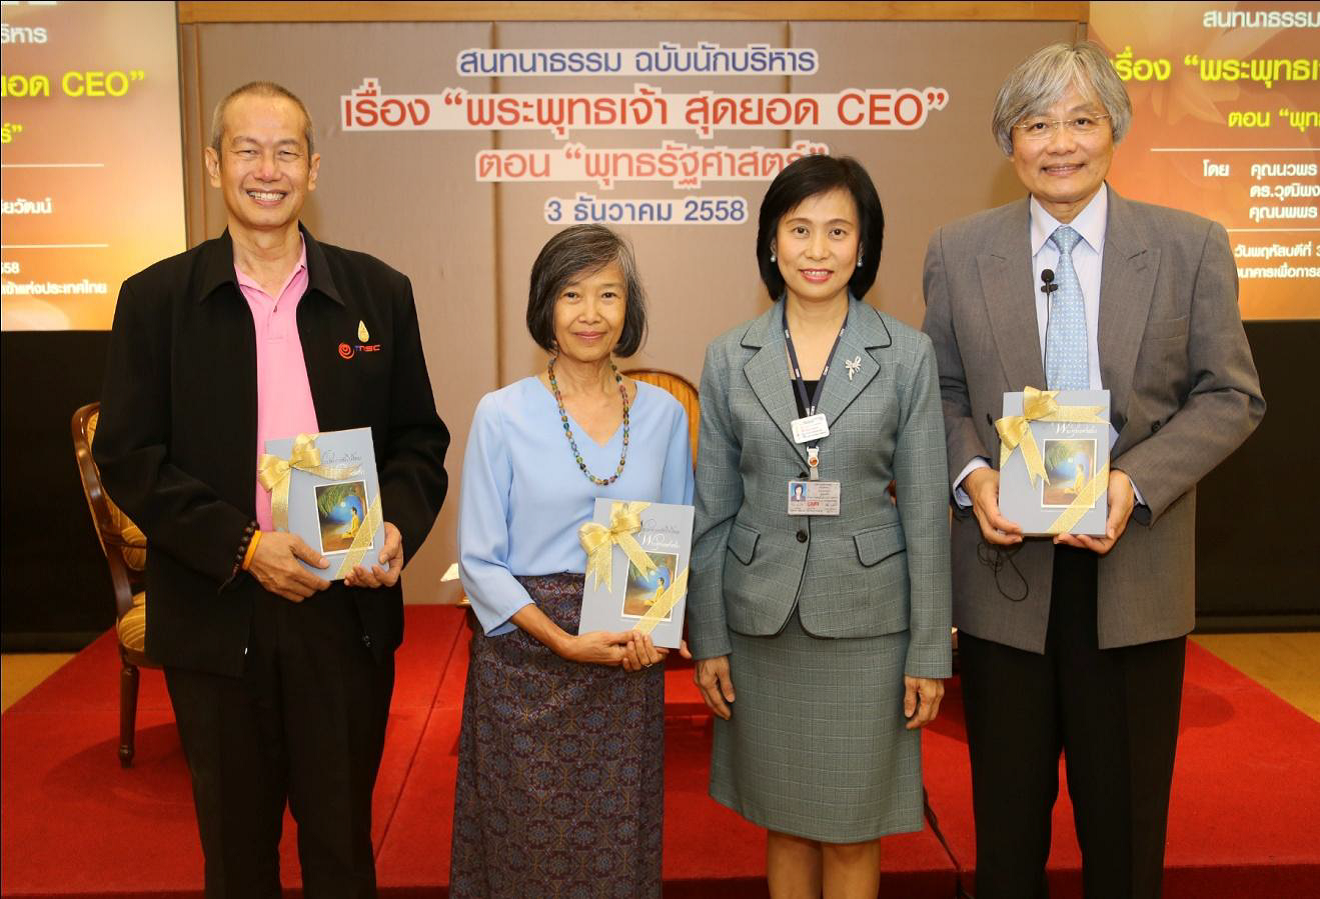 EXIM Thailand Holds Dharma Talk for Executives on Buddhist Political Management